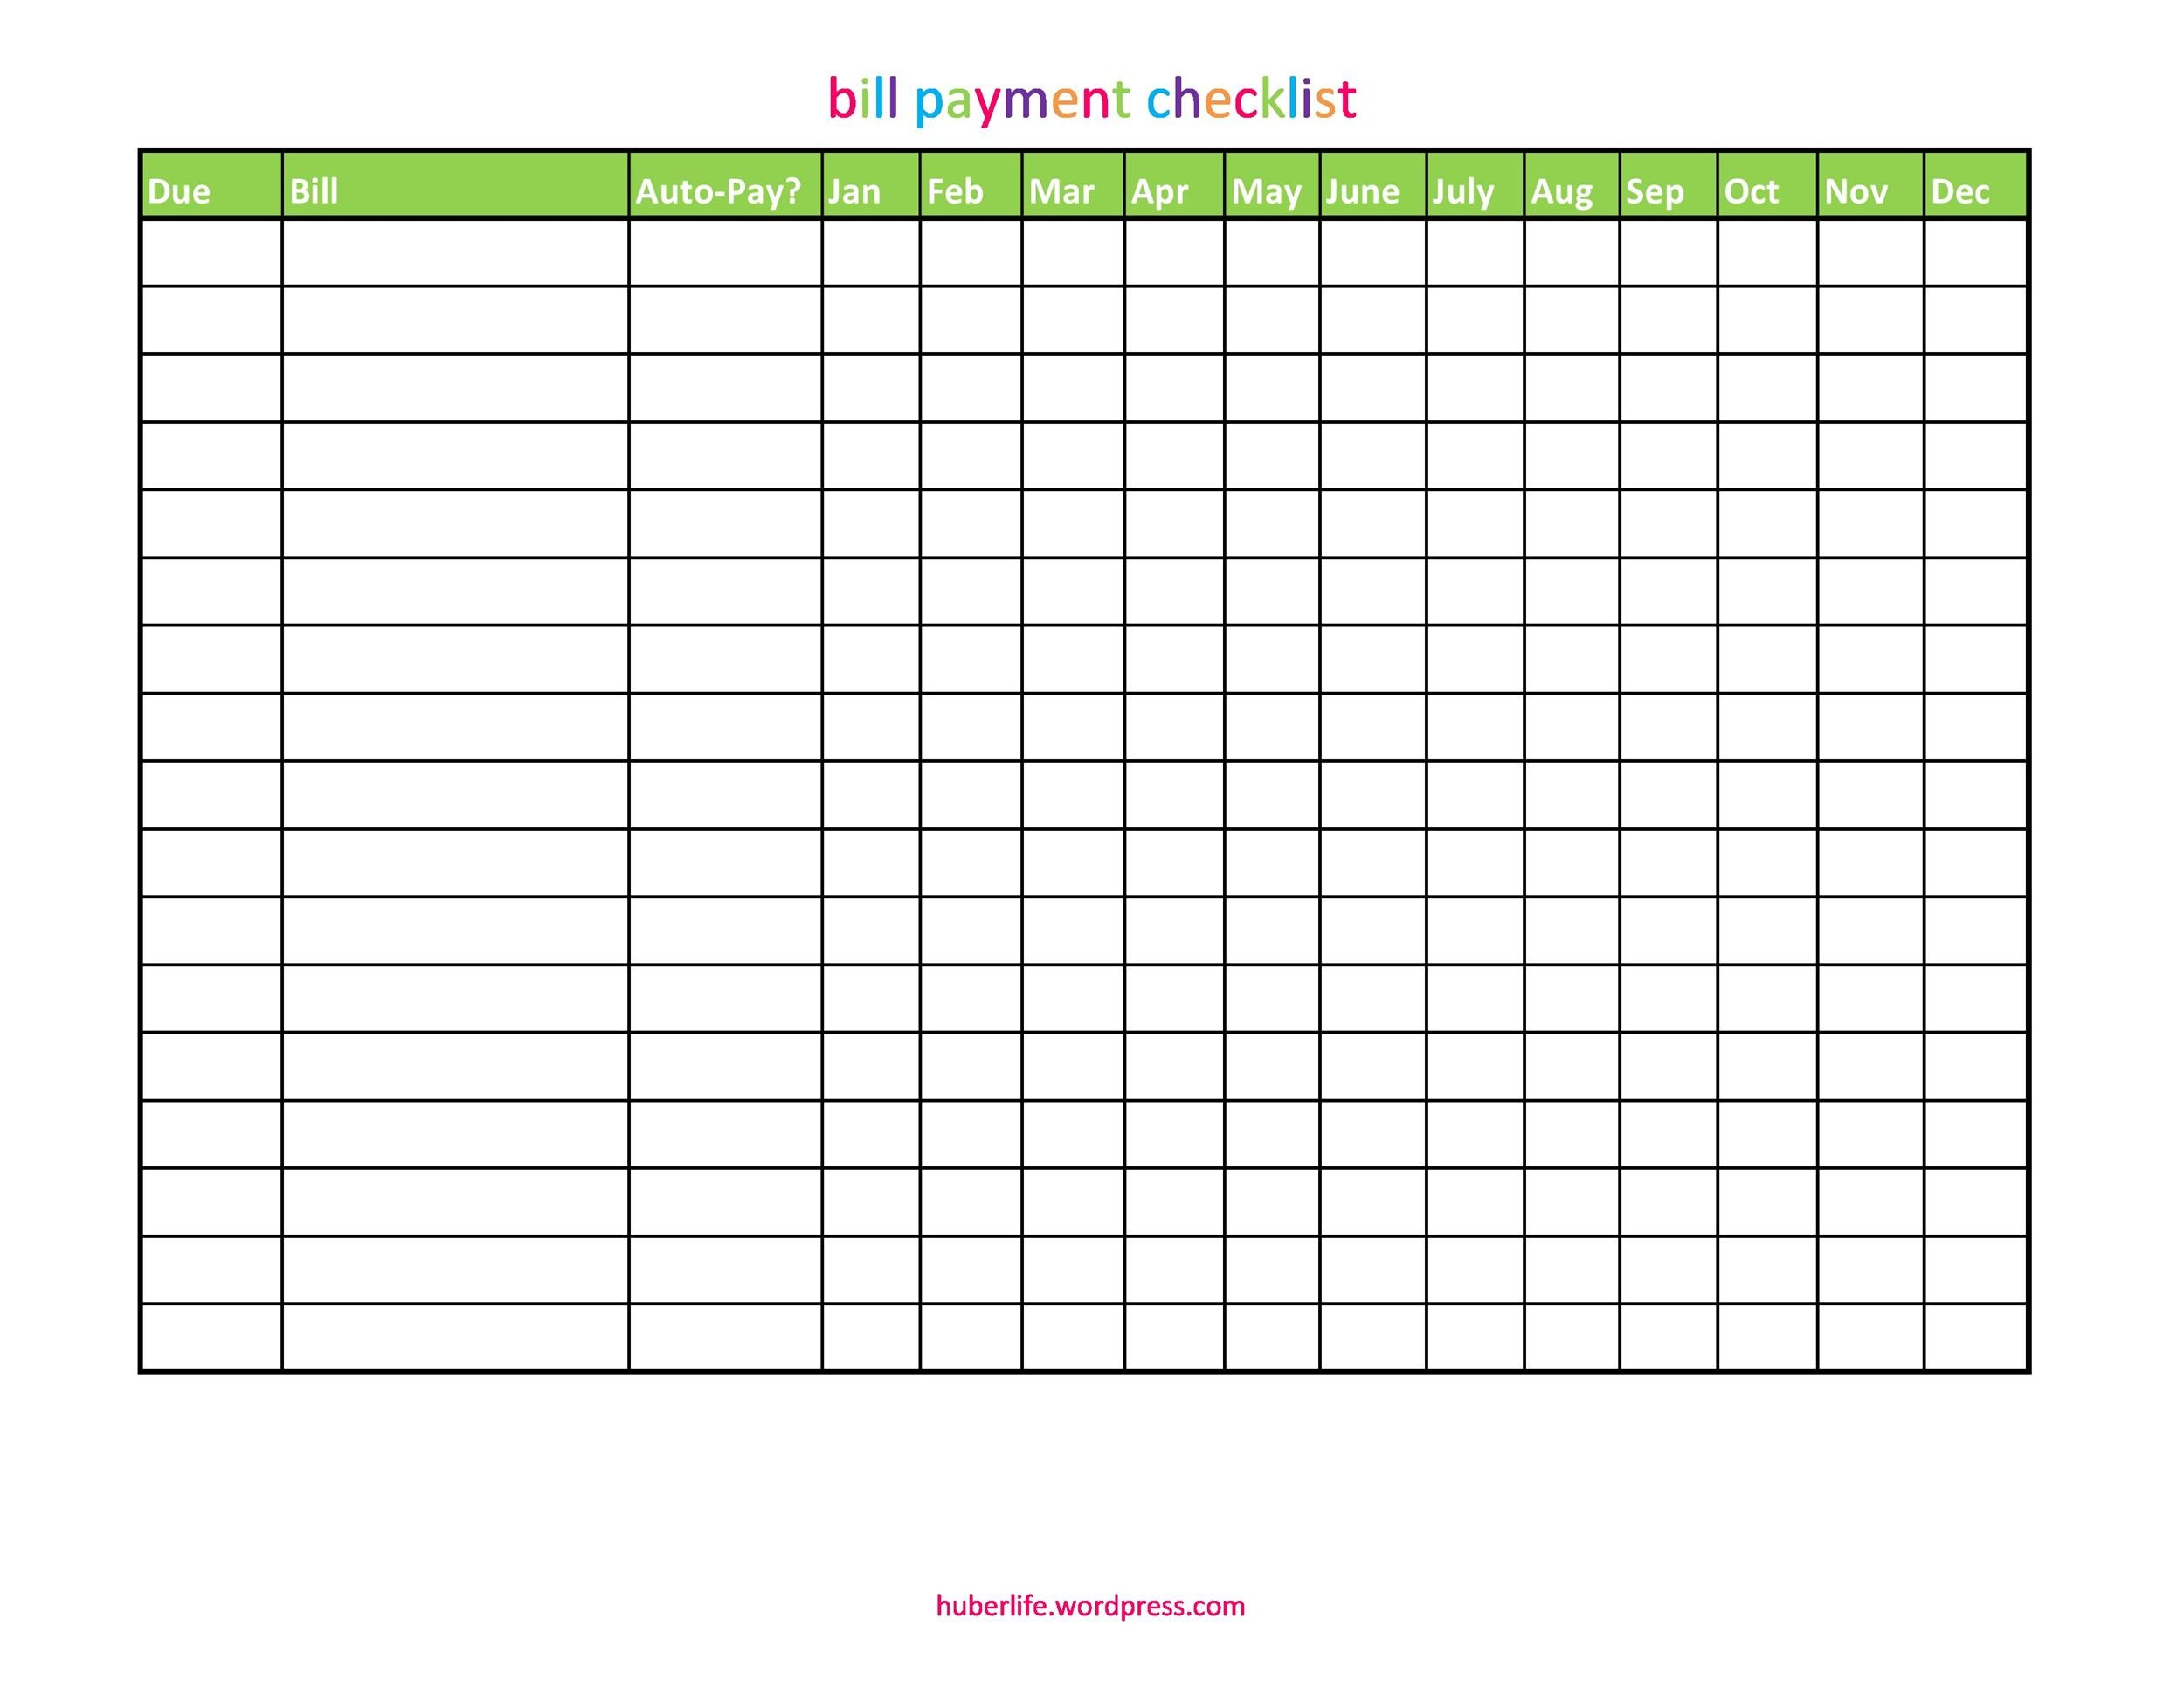 10 Free Bill Pay Checklists & Bill Calendars (PDF, Word & Excel) With Bill Payment Checklist Template Regarding Bill Payment Checklist Template